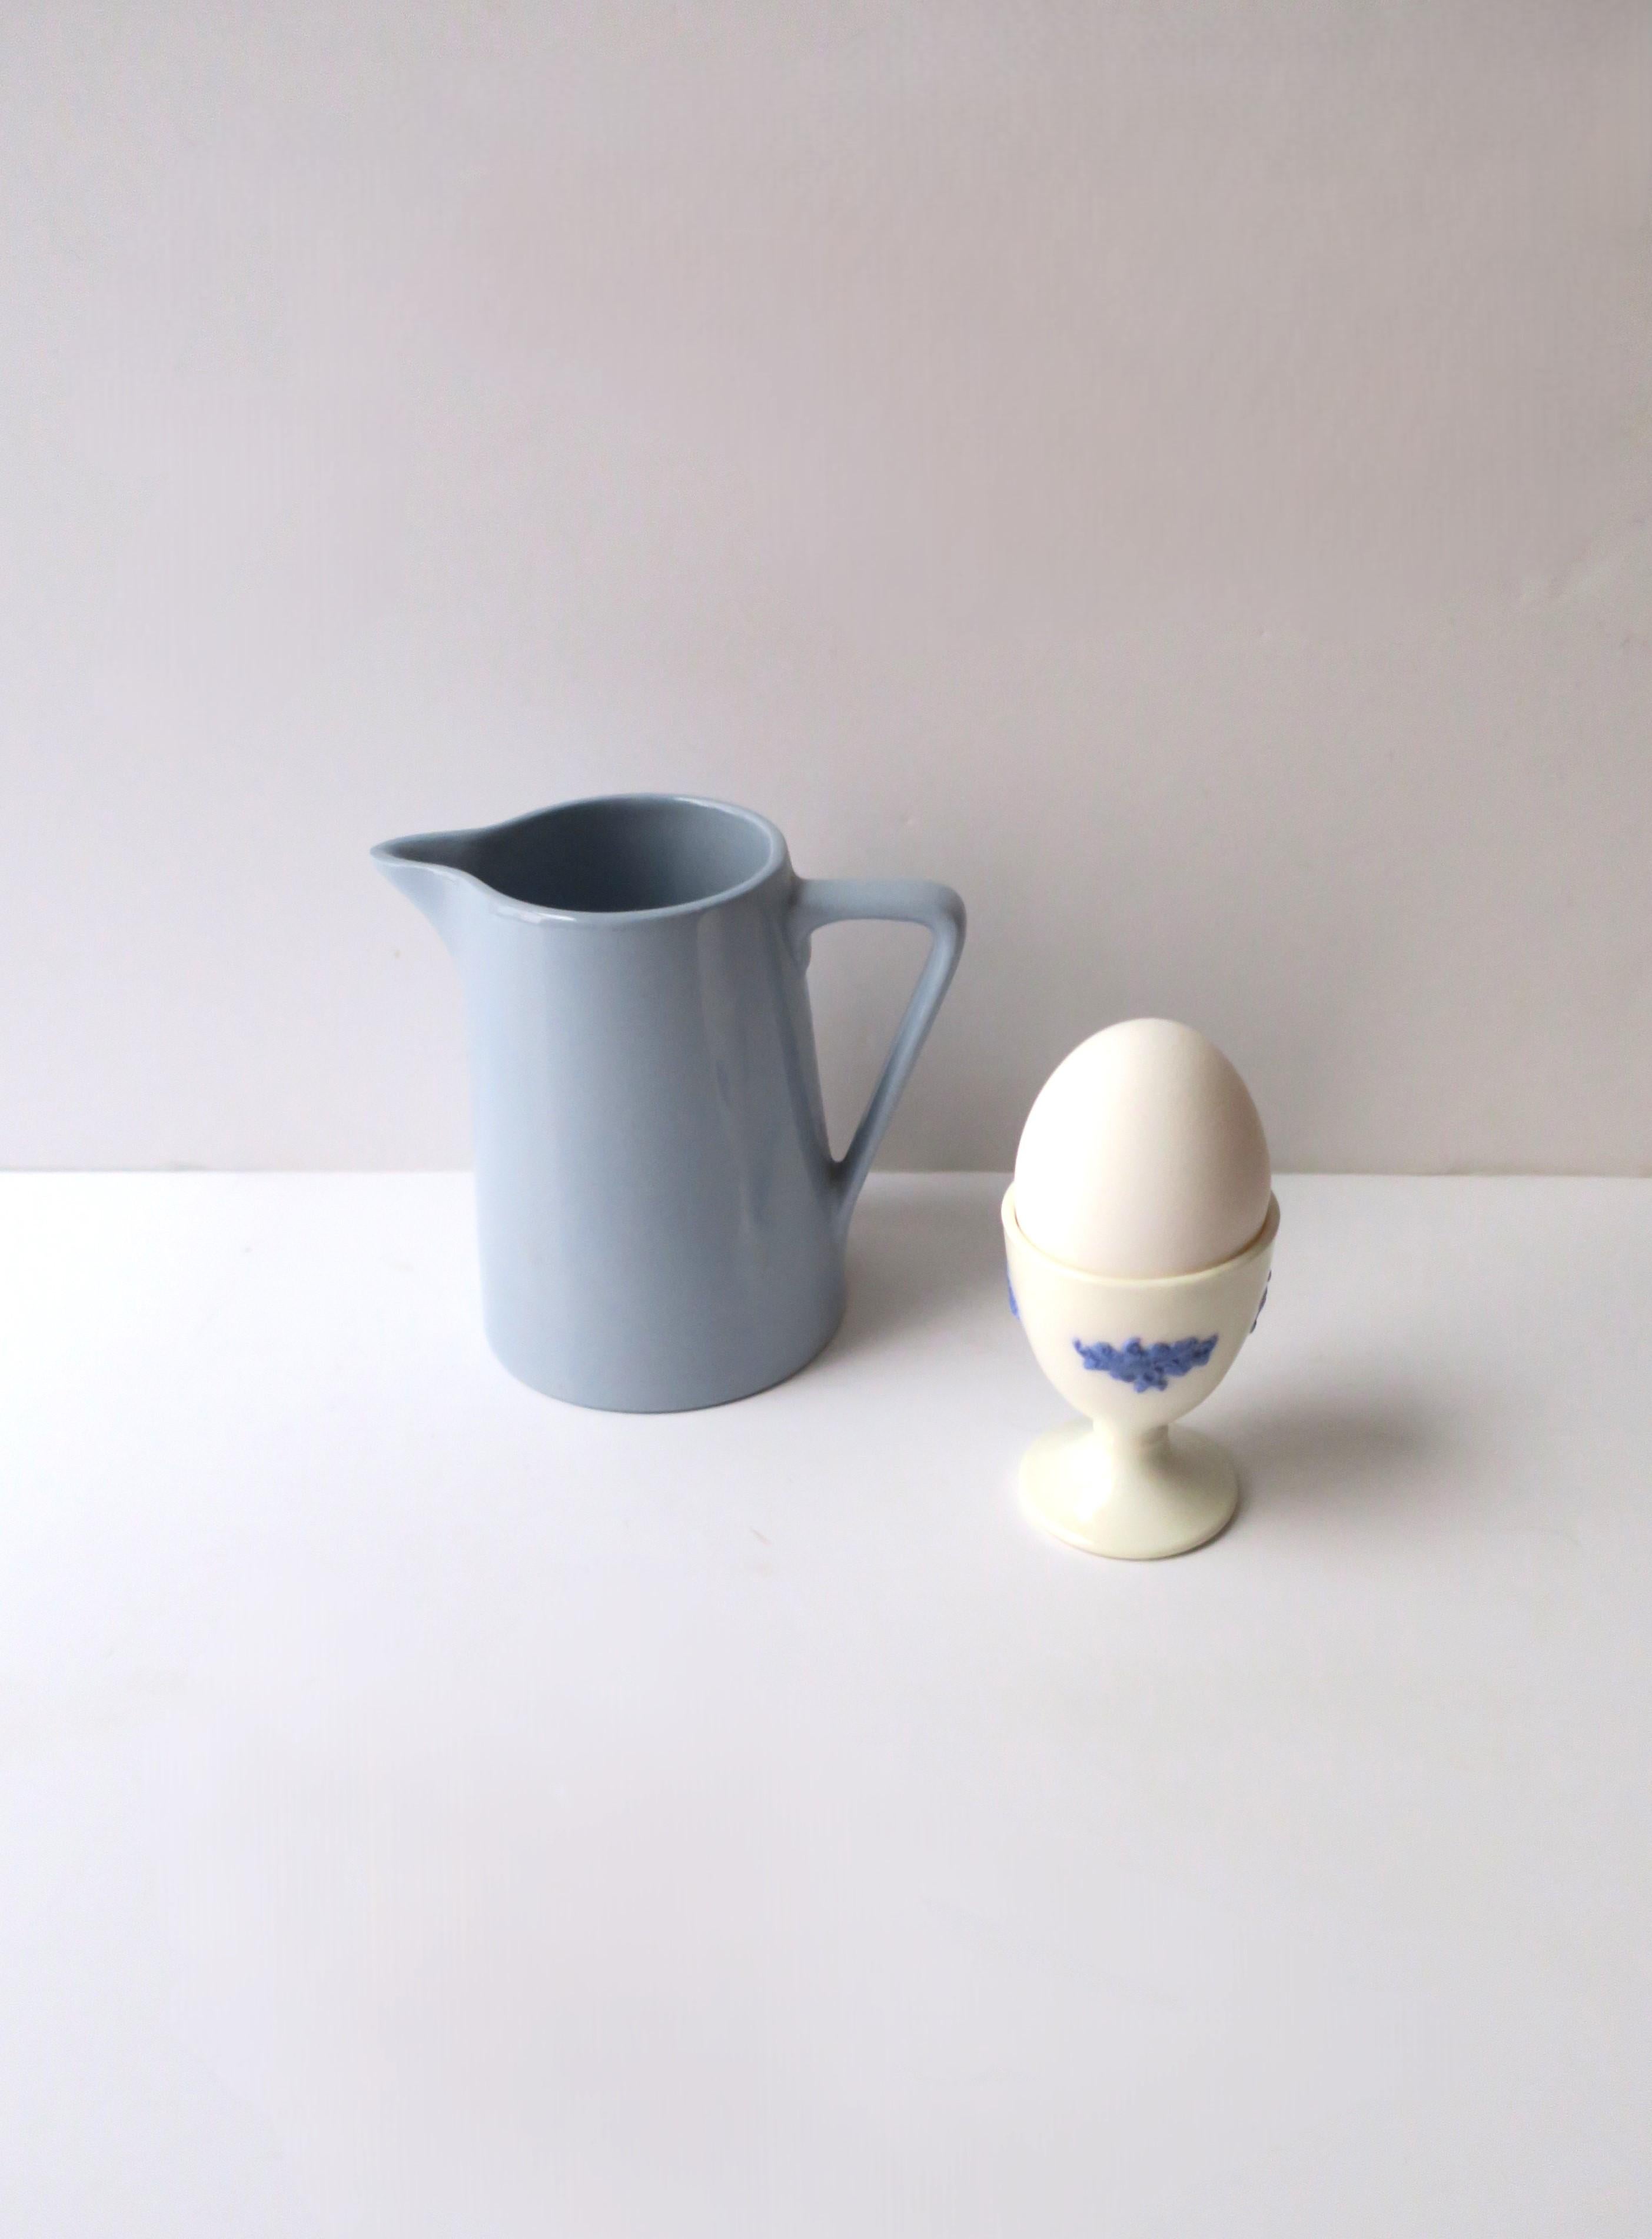 20th Century Blue and White Porcelain Egg Holder Cup For Sale